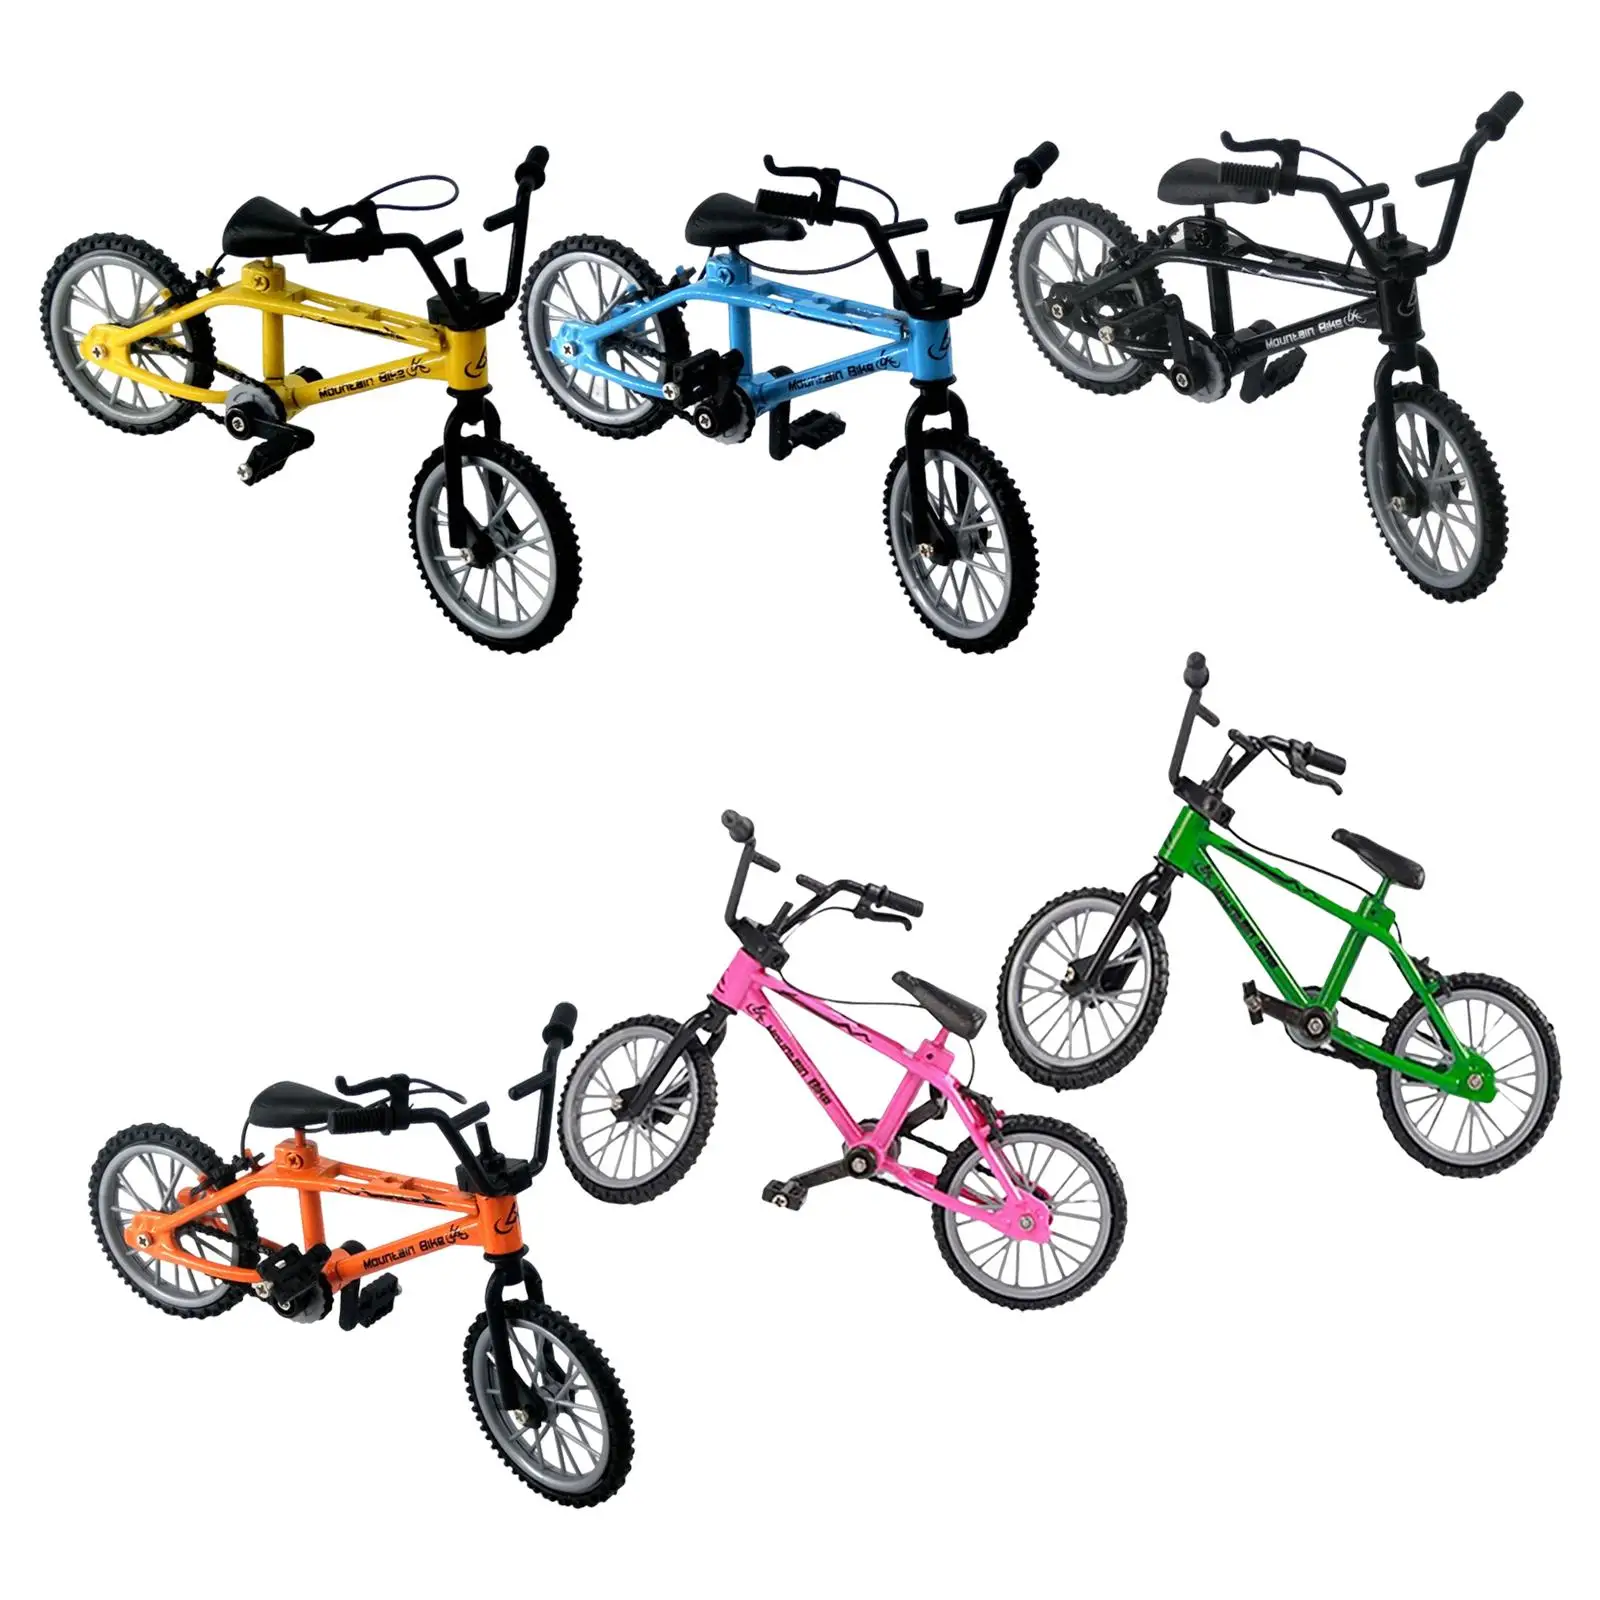 1/18 Mini Bicycle Model Miniature Diecast Toys Crafts for Home Office Decor